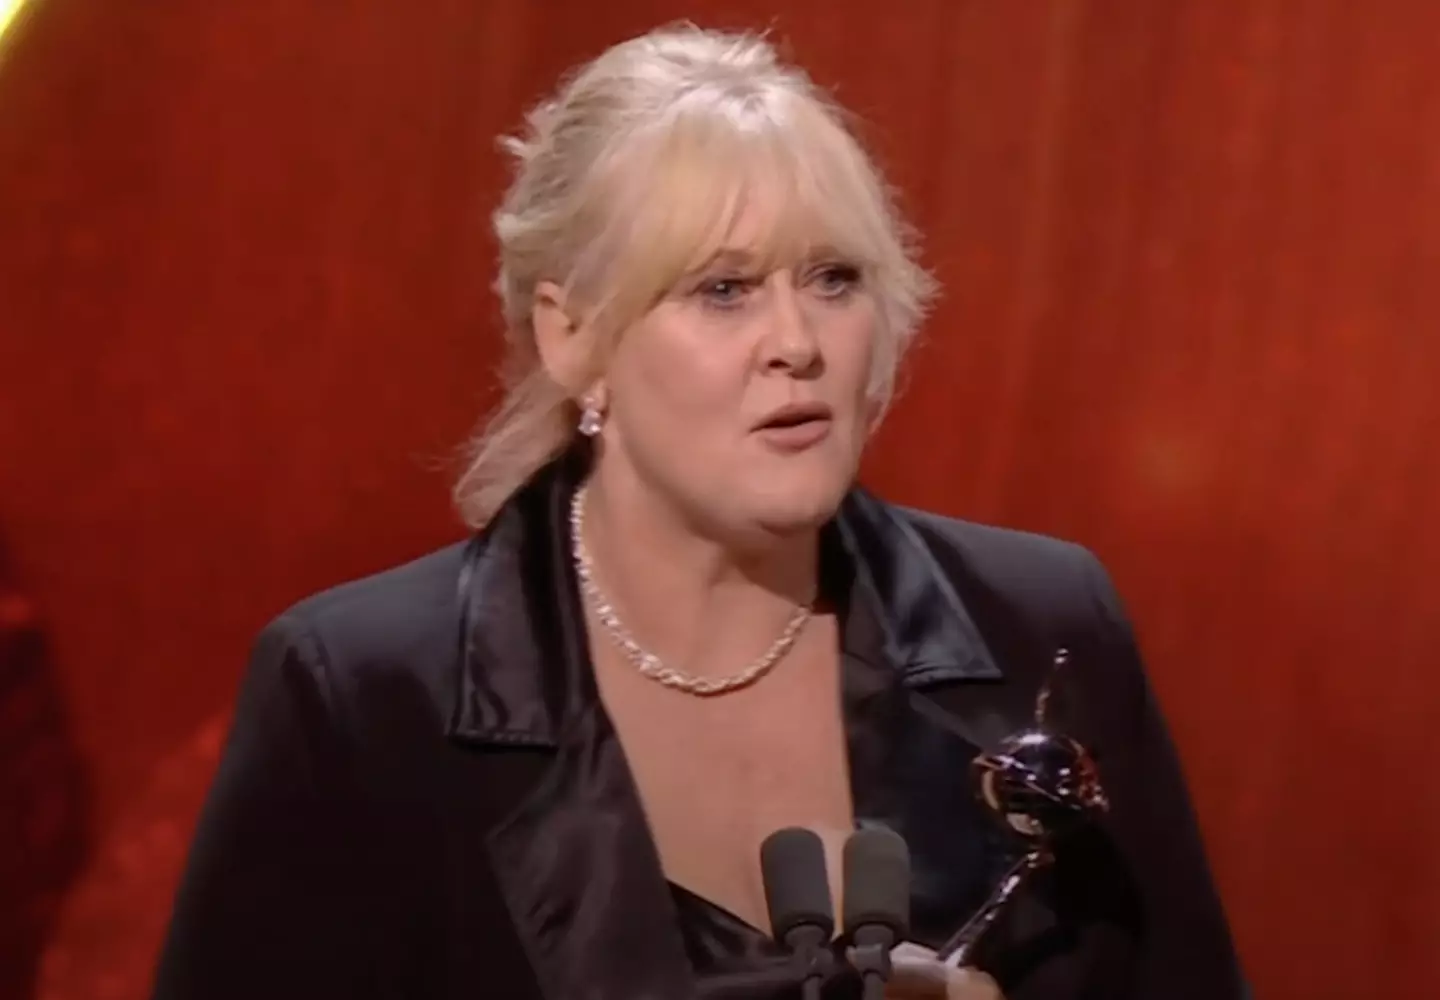 What did you think Sarah Lancashire's voice actually sounded like?